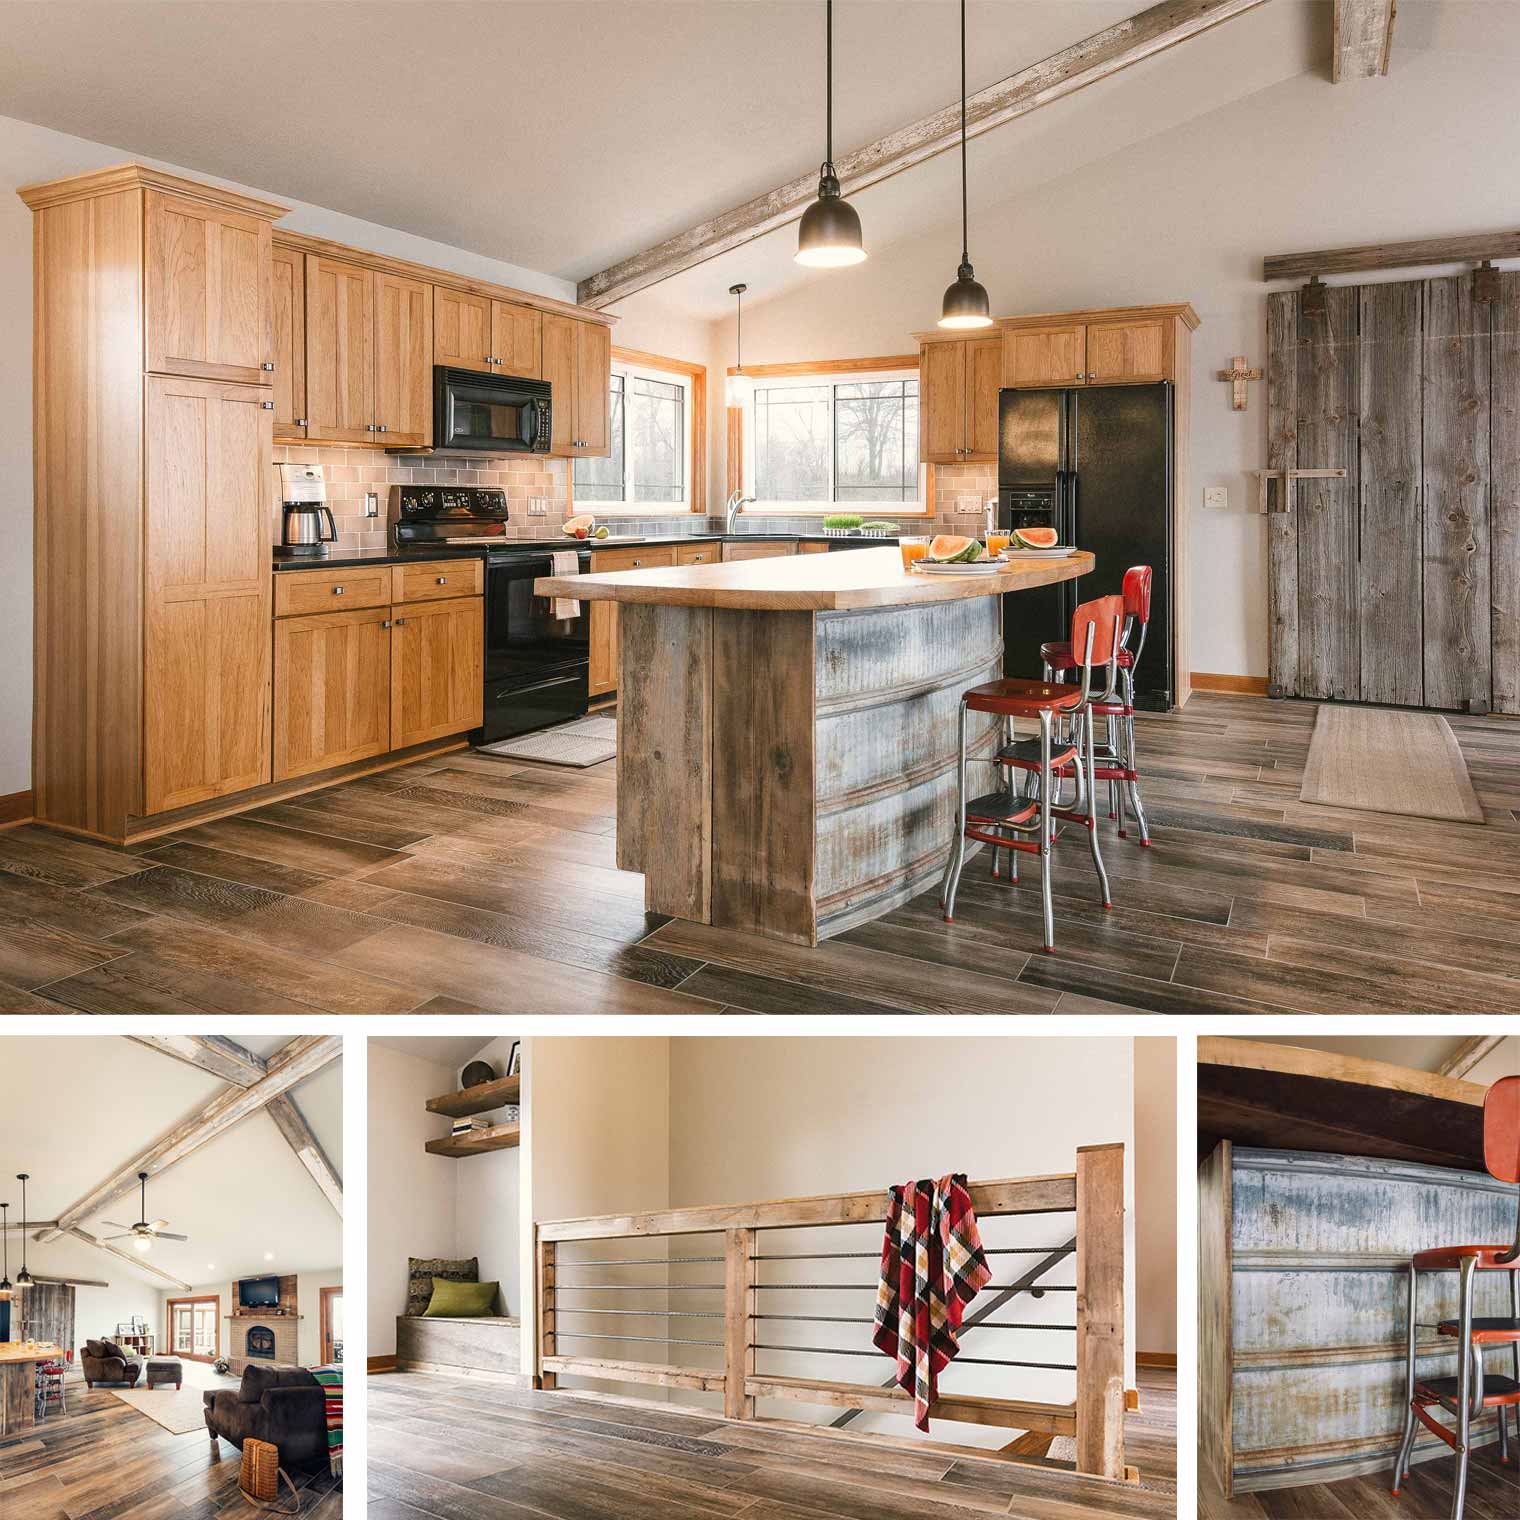 Silent Rivers projects 2017_modern rustic Iowa farmhouse kitchen, family room, steel railing, salvaged silo metal and barn wood remodel by Silent Rivers